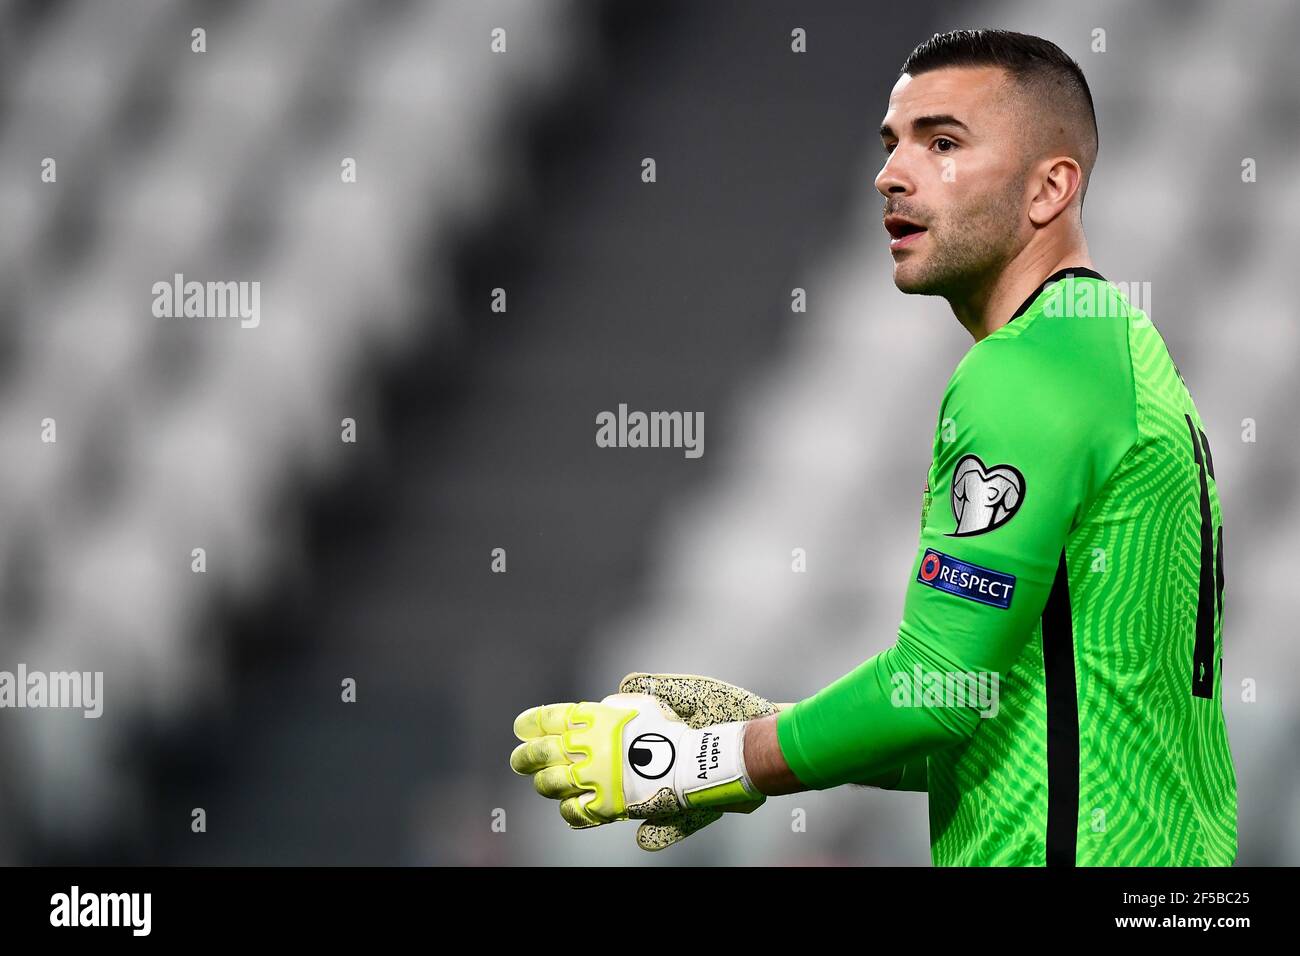 Turin, Italy - 24 March, 2021: Anthony Lopes of Portugal looks on during the FIFA World Cup 2022 Qatar qualifying football match between Portugal and Azerbaijan. Portugal face Azerbaijan at a neutral venue in Turin behind closed doors to prevent the spread of Covid-19 variants. Portugal won 1-0 over Azerbaijan. Credit: Nicolò Campo/Alamy Live News Stock Photo